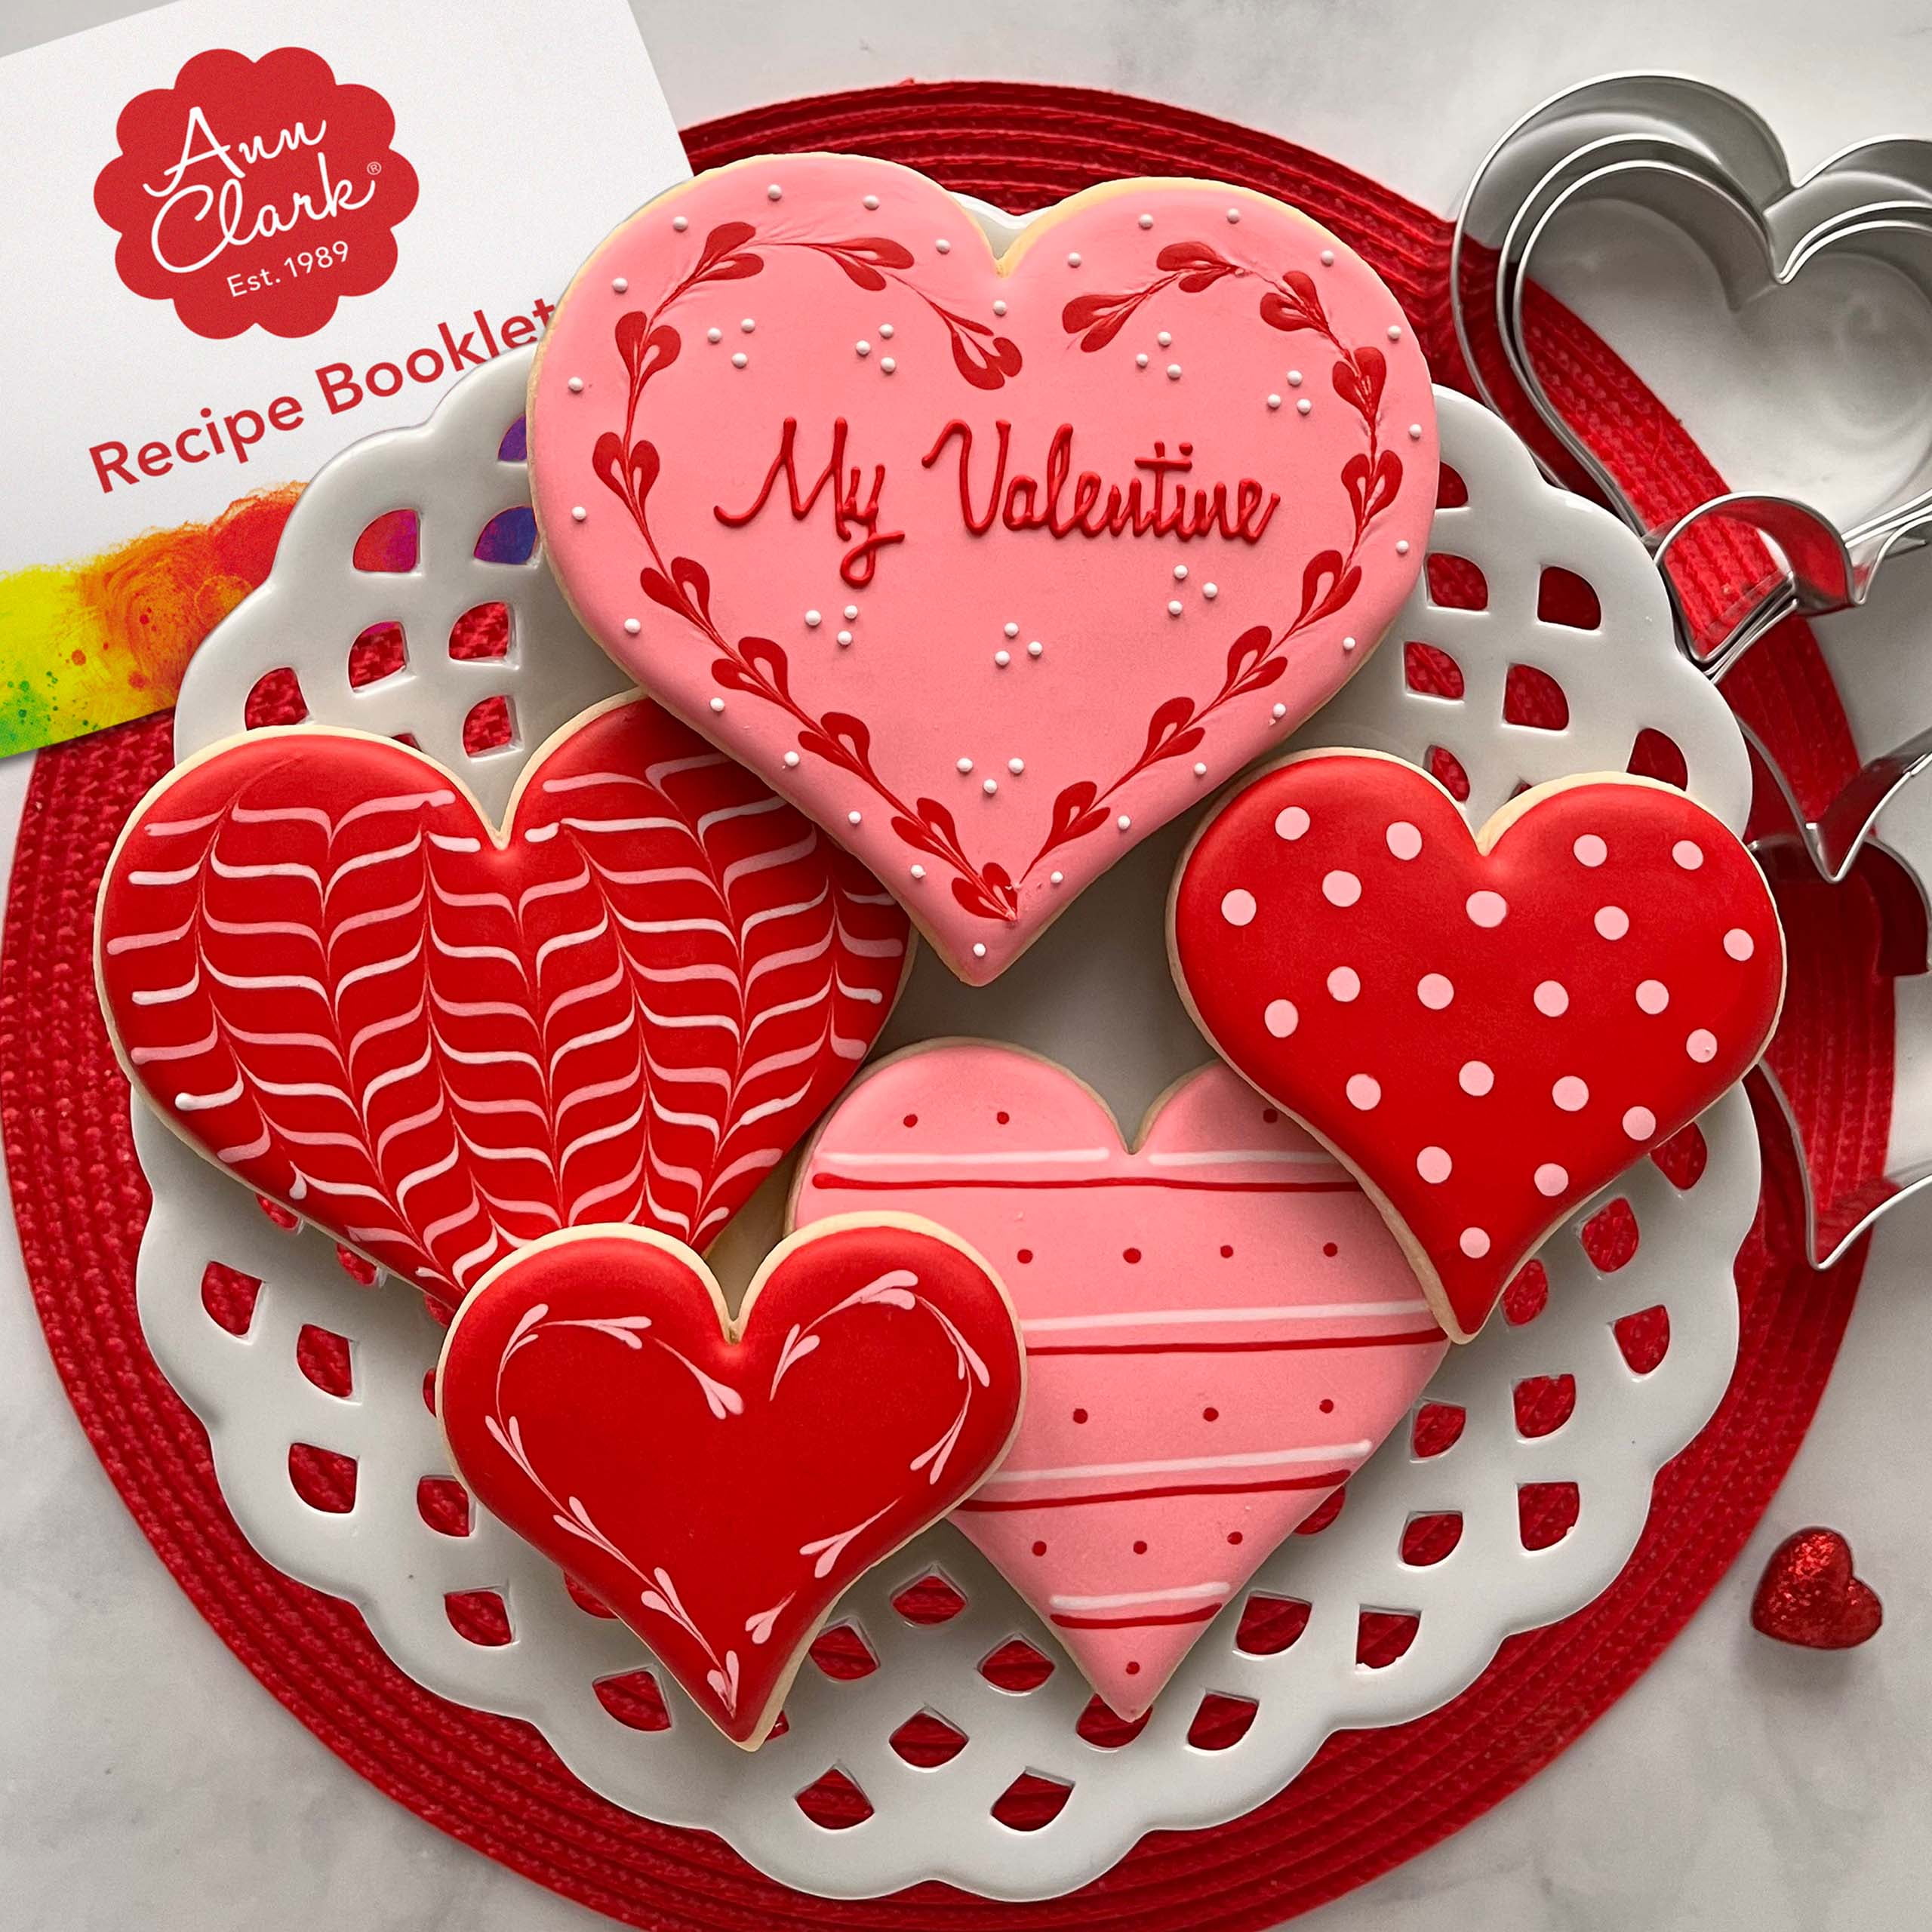 Heart Cookie Cutters 5-Pc. Valentine's Cookie Cutter Set Made in USA by Ann  Clark, Large, Medium & Small Heart Shapes